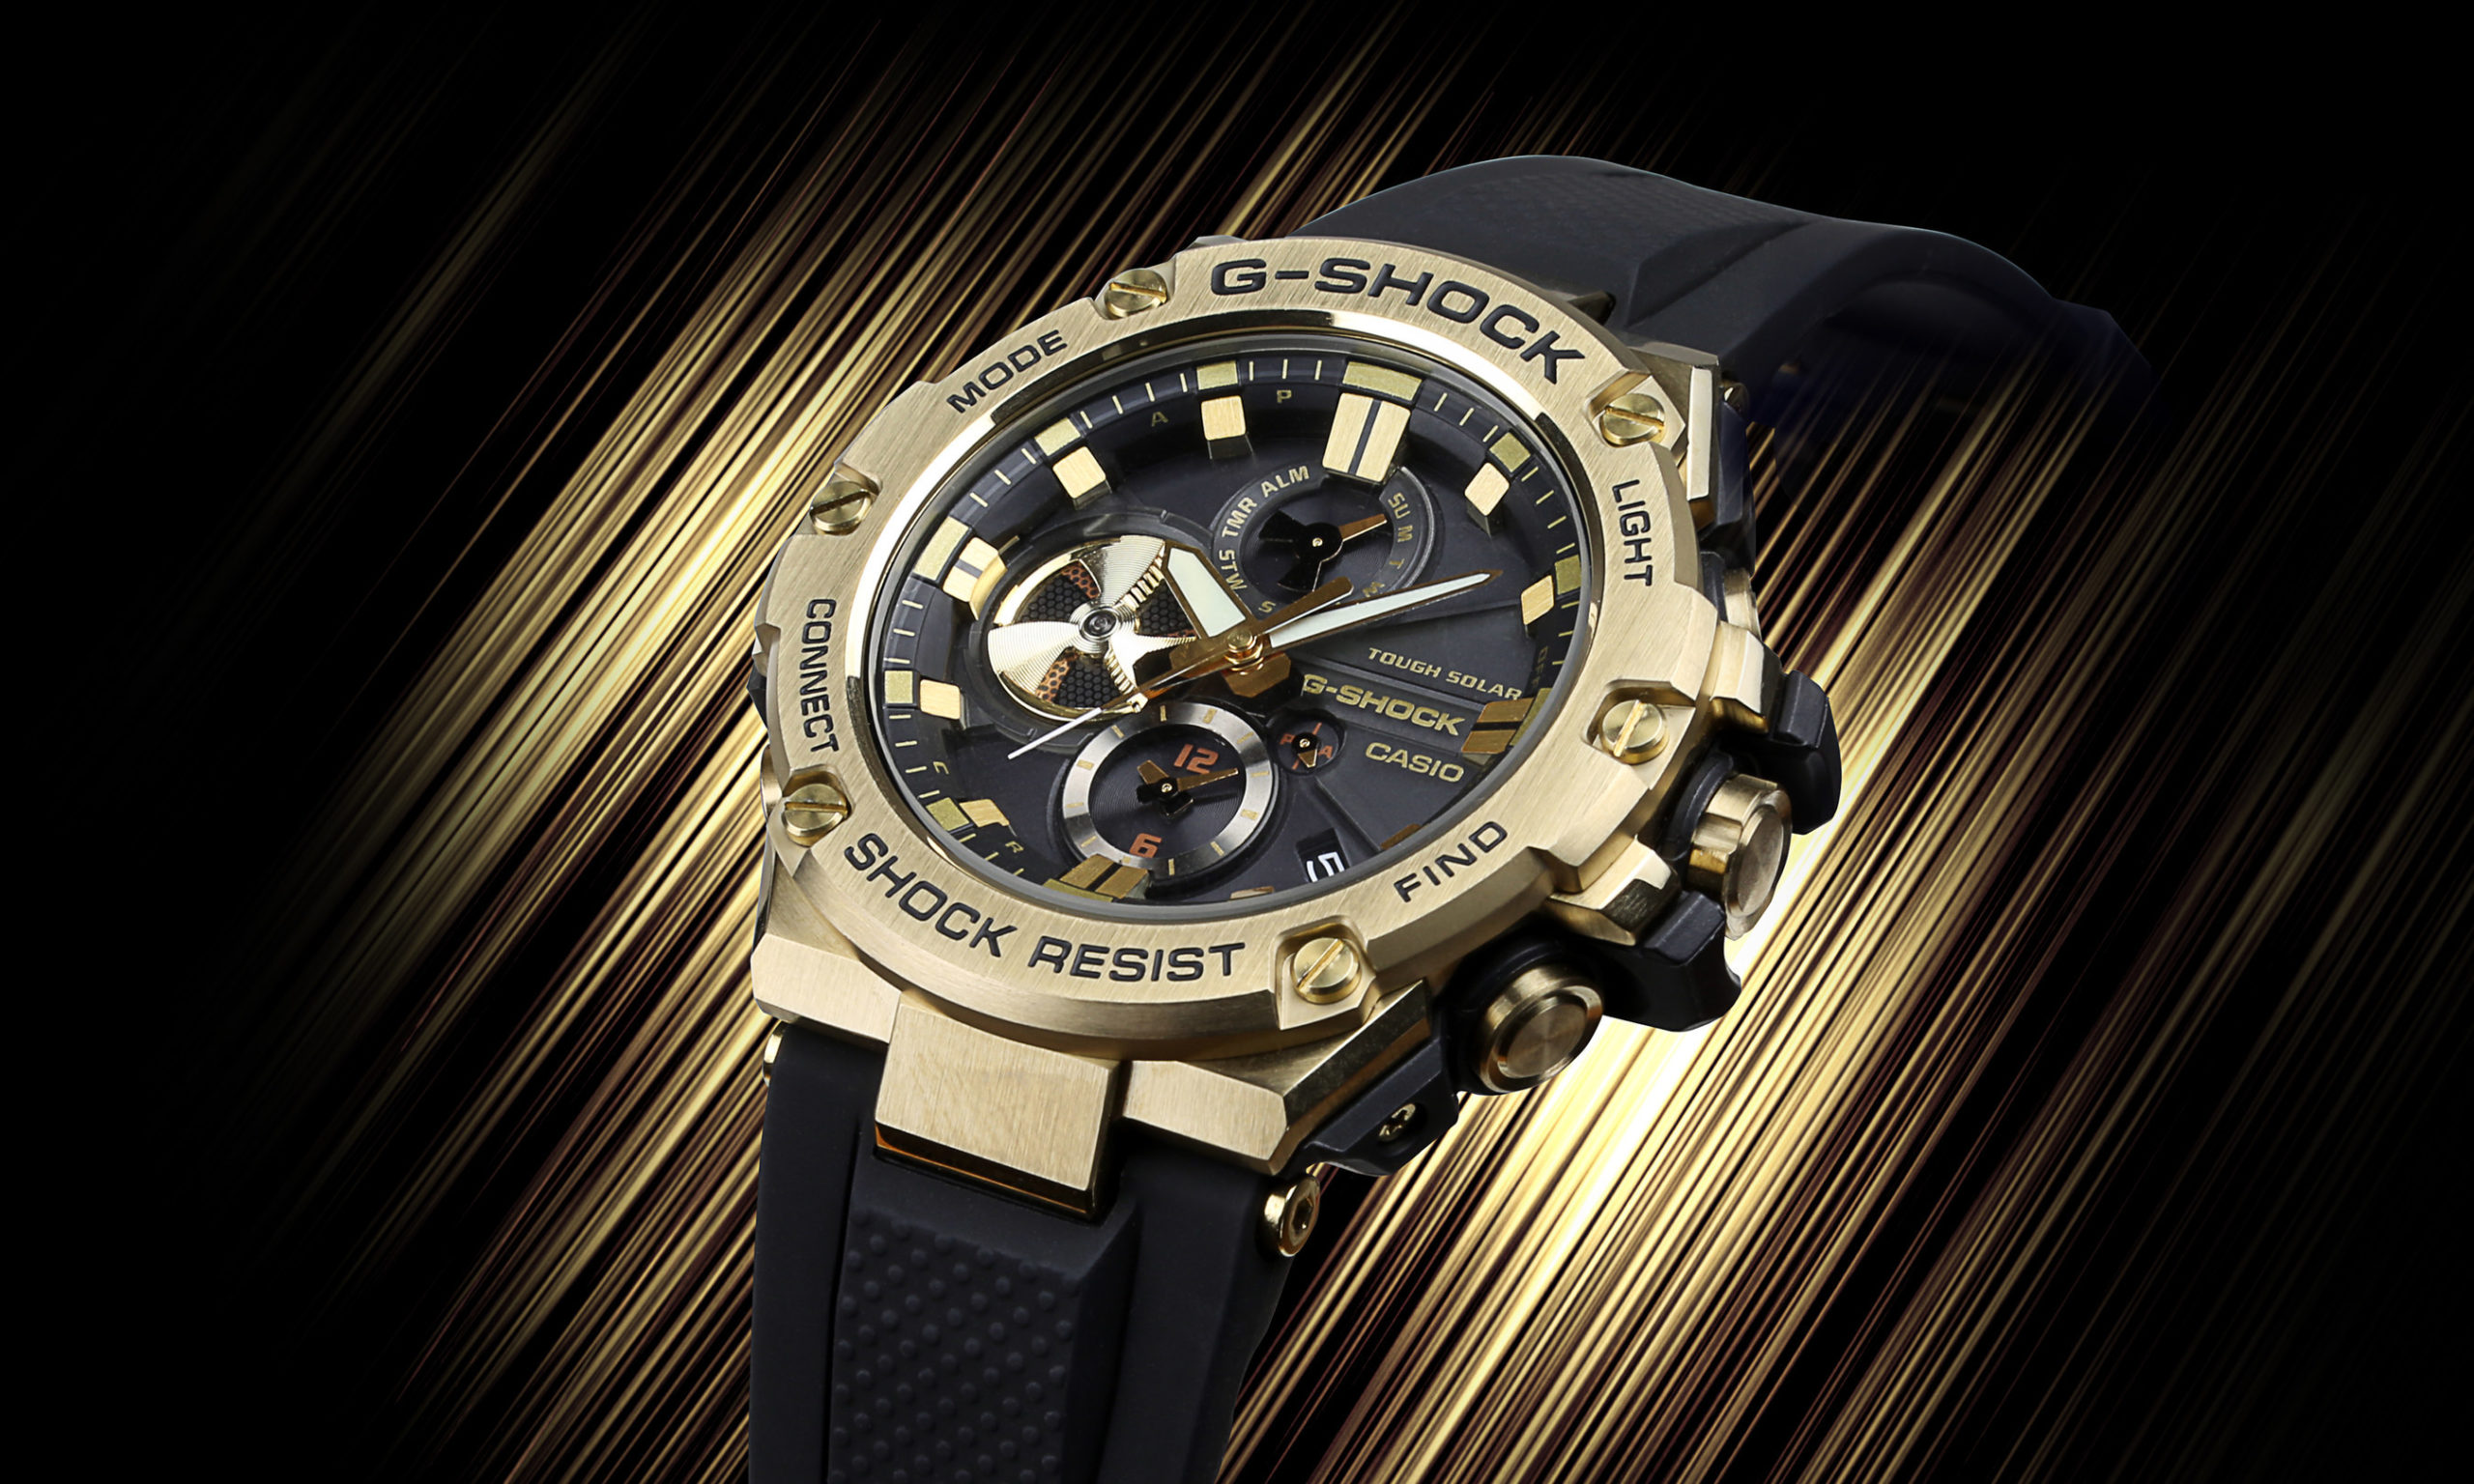 A Touch of Glamor: Meet the new G-Shock G-Steel with Gold-Colored Bezel